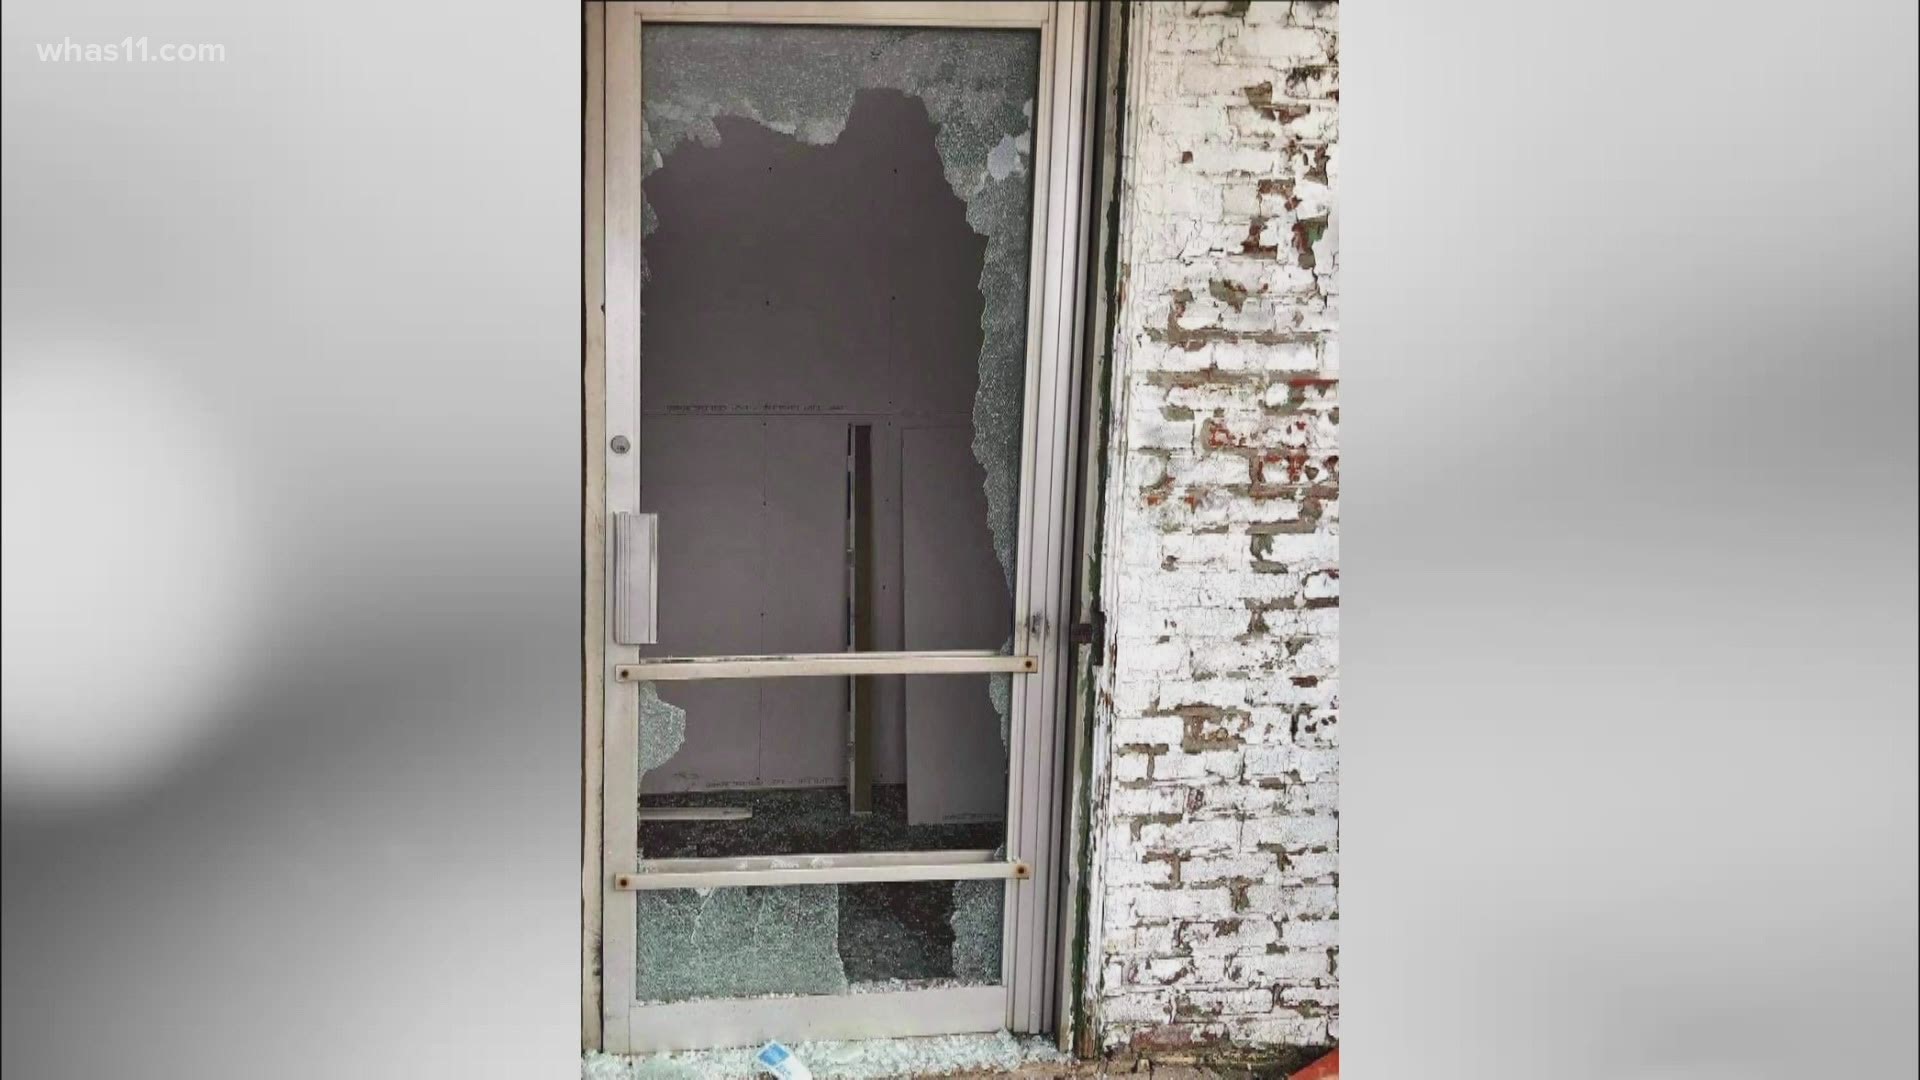 La Chandeleur restaurant in the Beechmont area of Louisville was broken into--again and the owner didn't have a normal response. He cleans up and plans to stay.